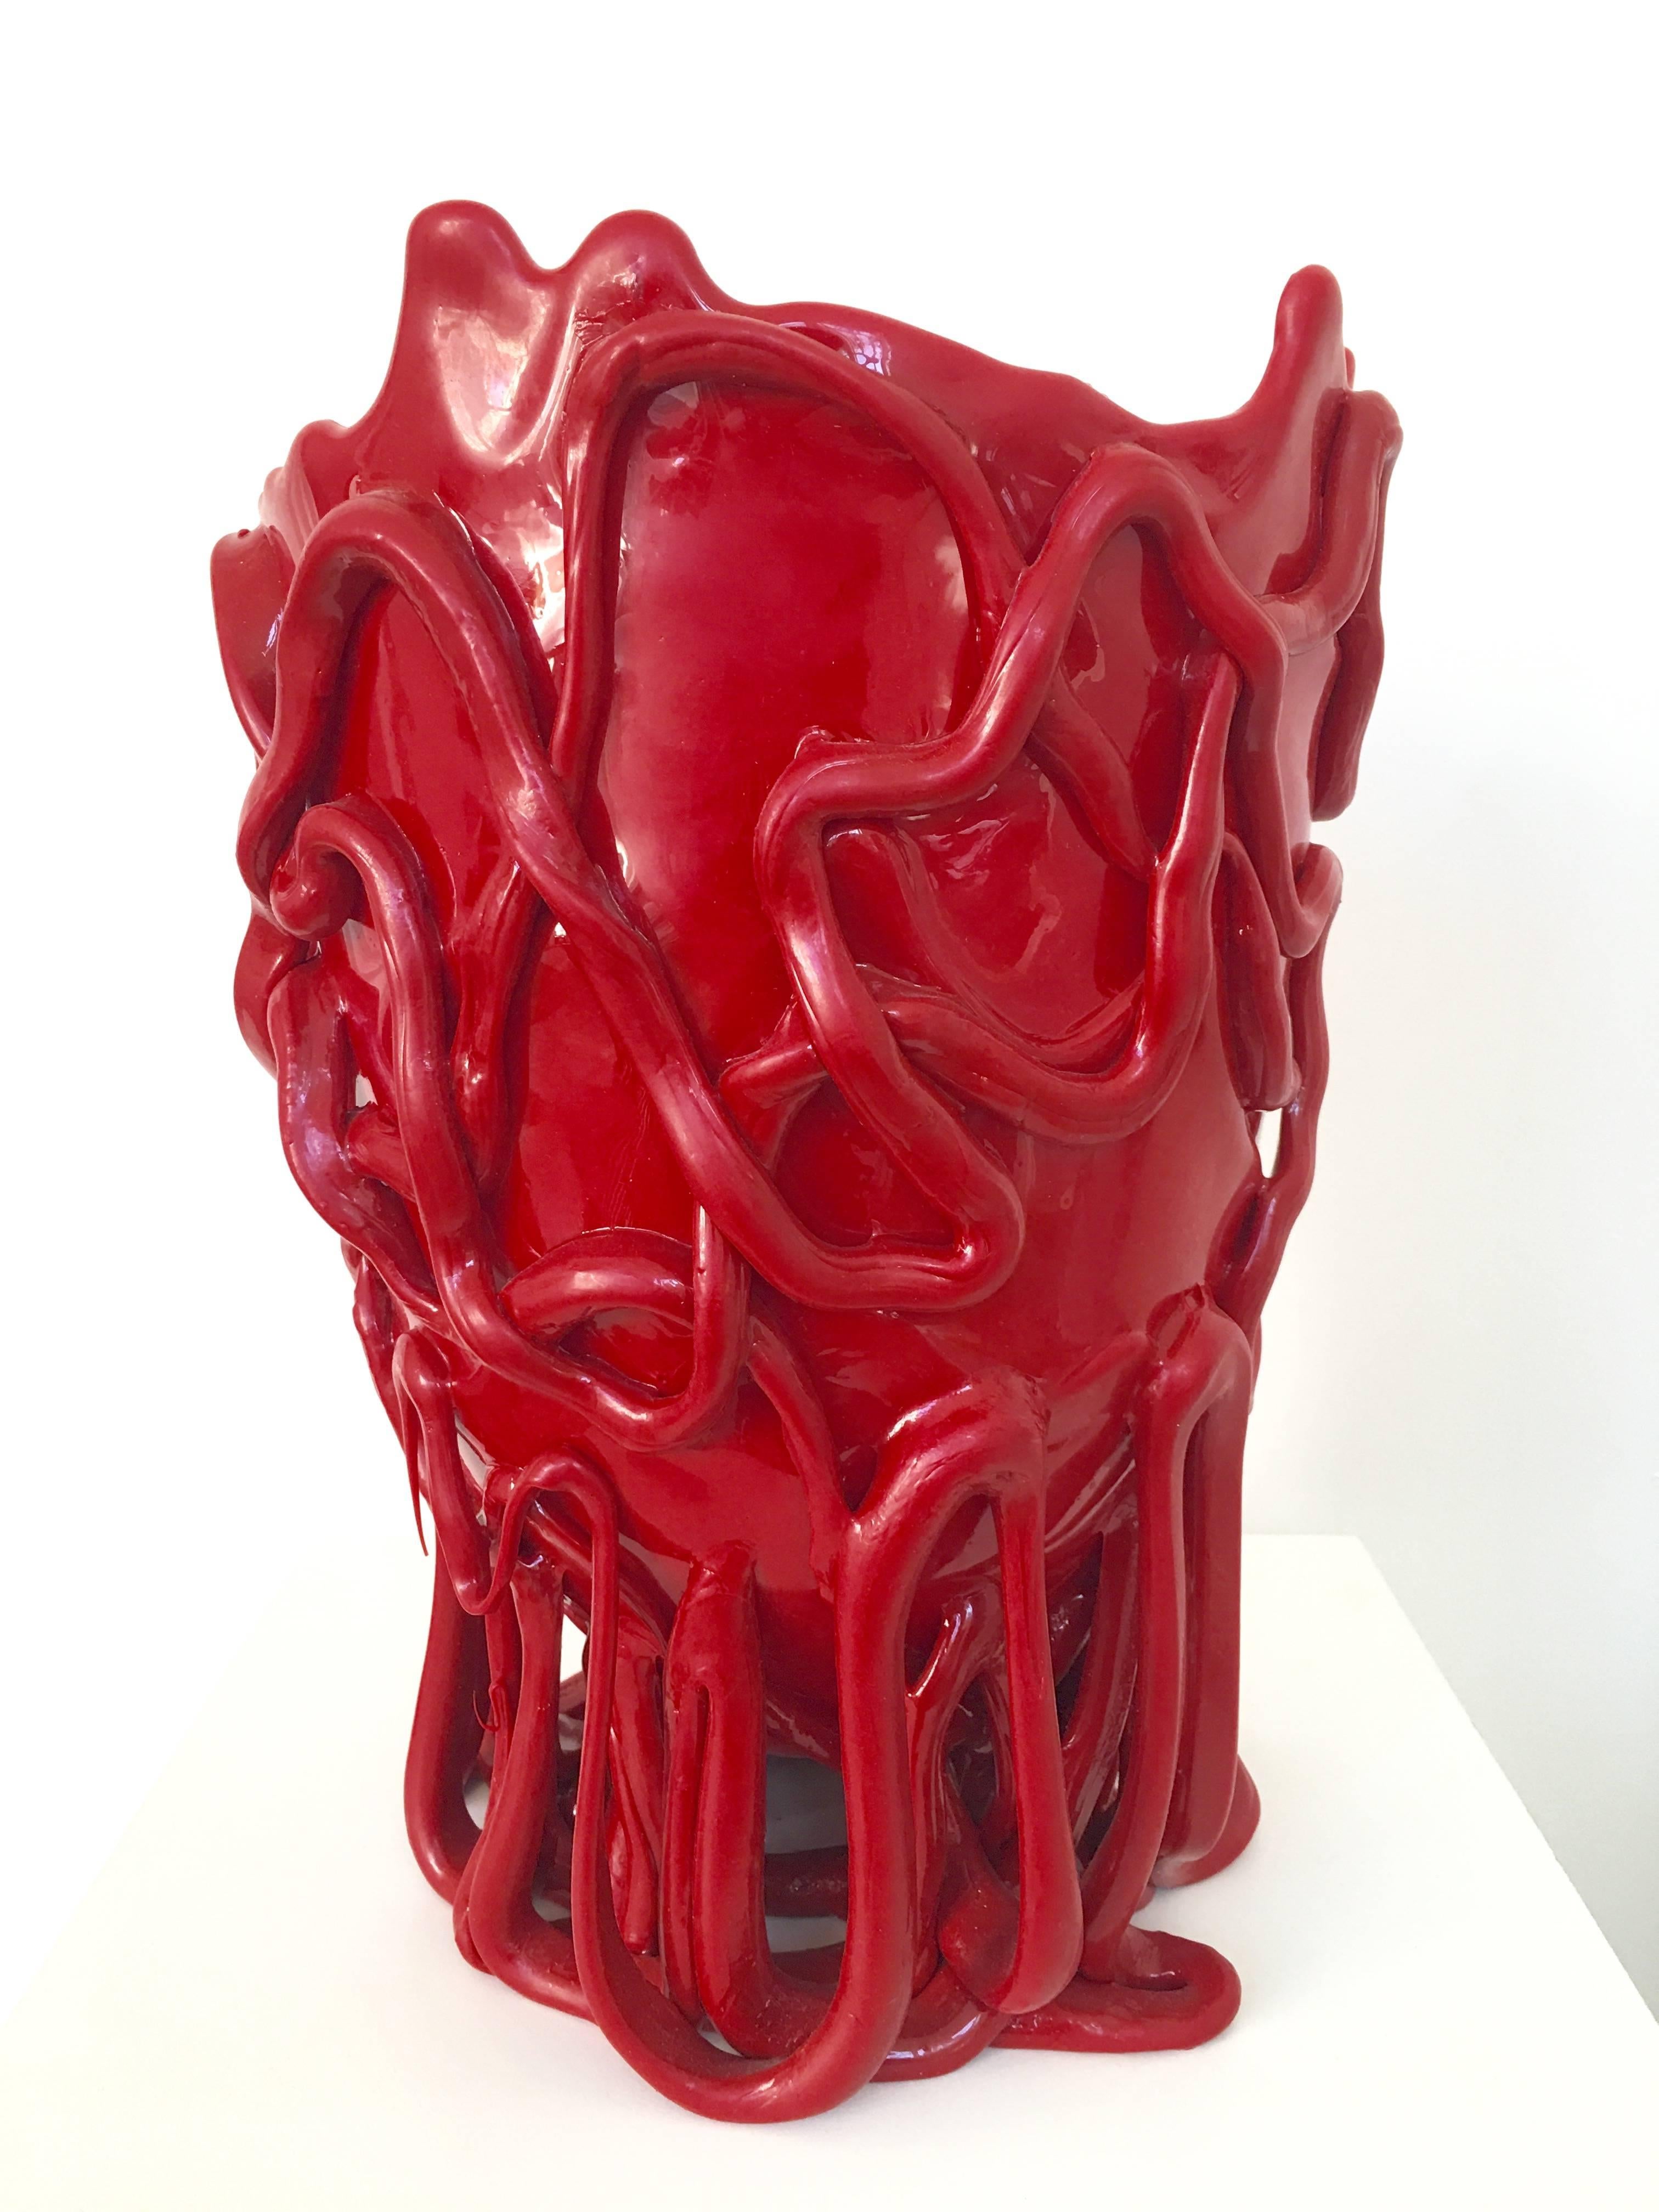 A fantastic sculptural vase by Gaetano Pesce. The model is Medusa. The substantial piece nothing short of whimsy and character and is bound to be a focal point and conversation piece. Simply gorgeous and in excellent shape!